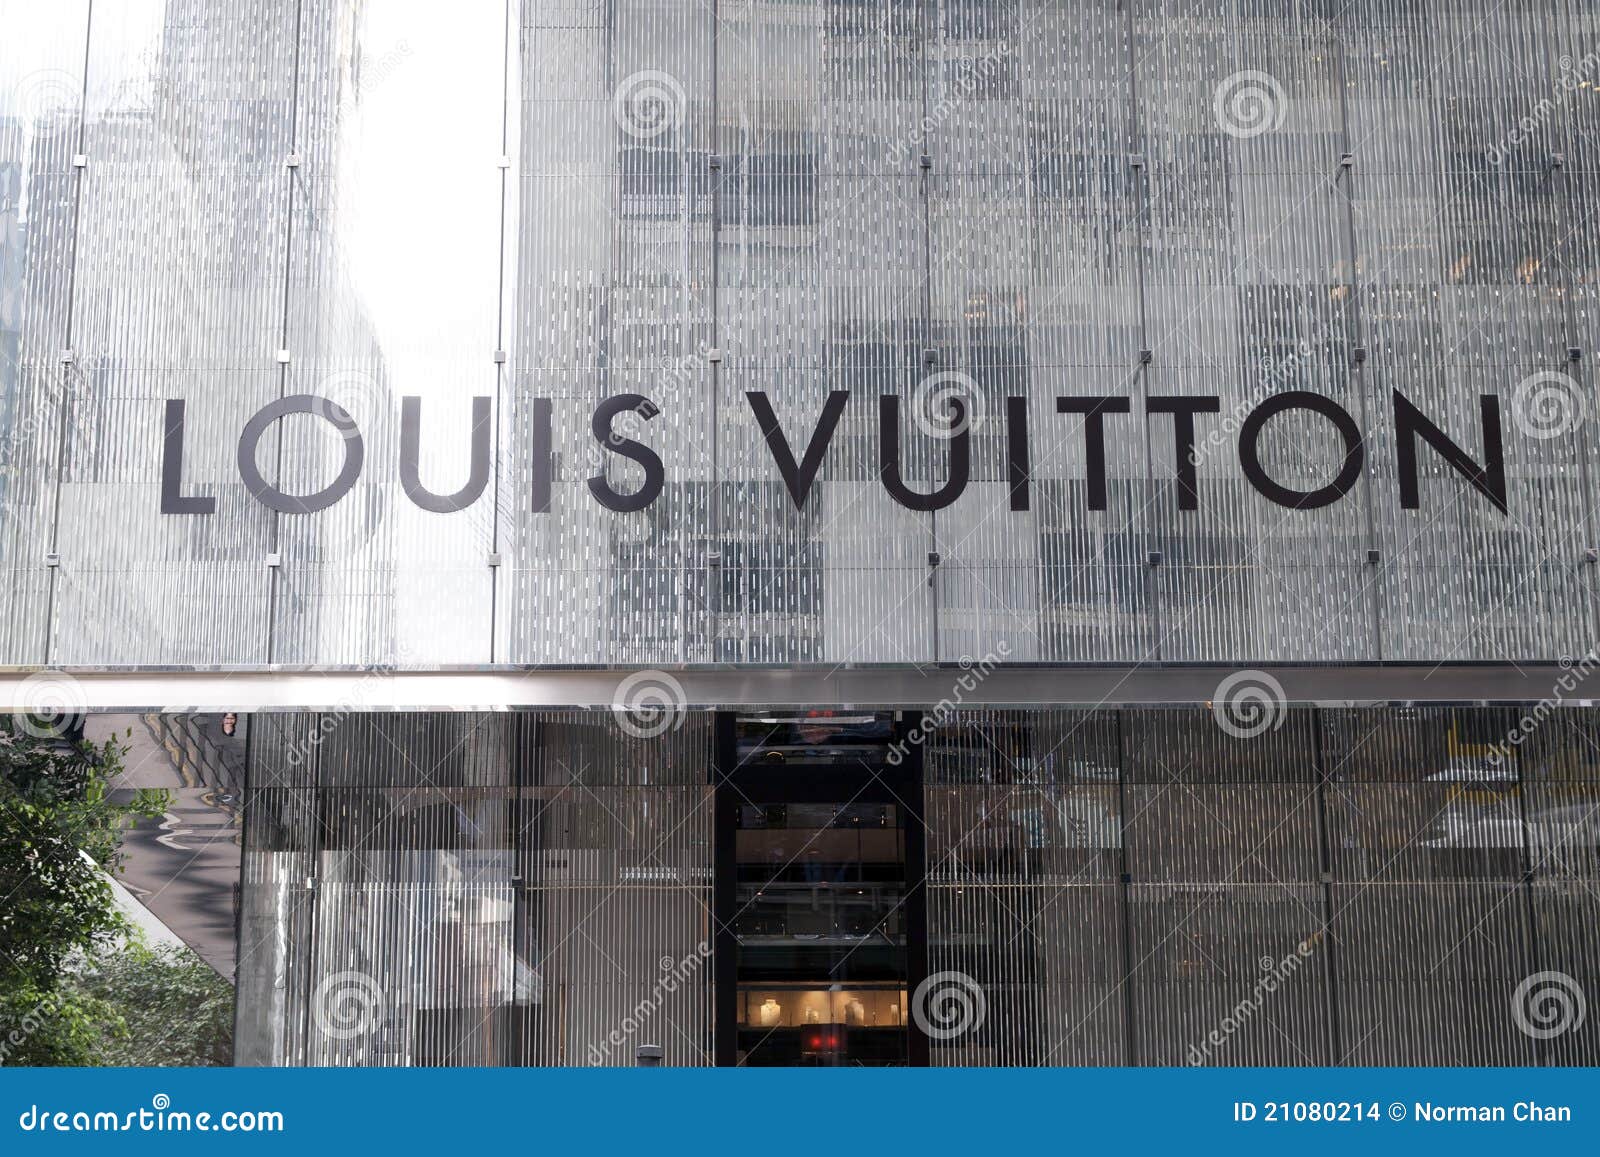 Show you kinds of custom business signs for Louis Vuitton